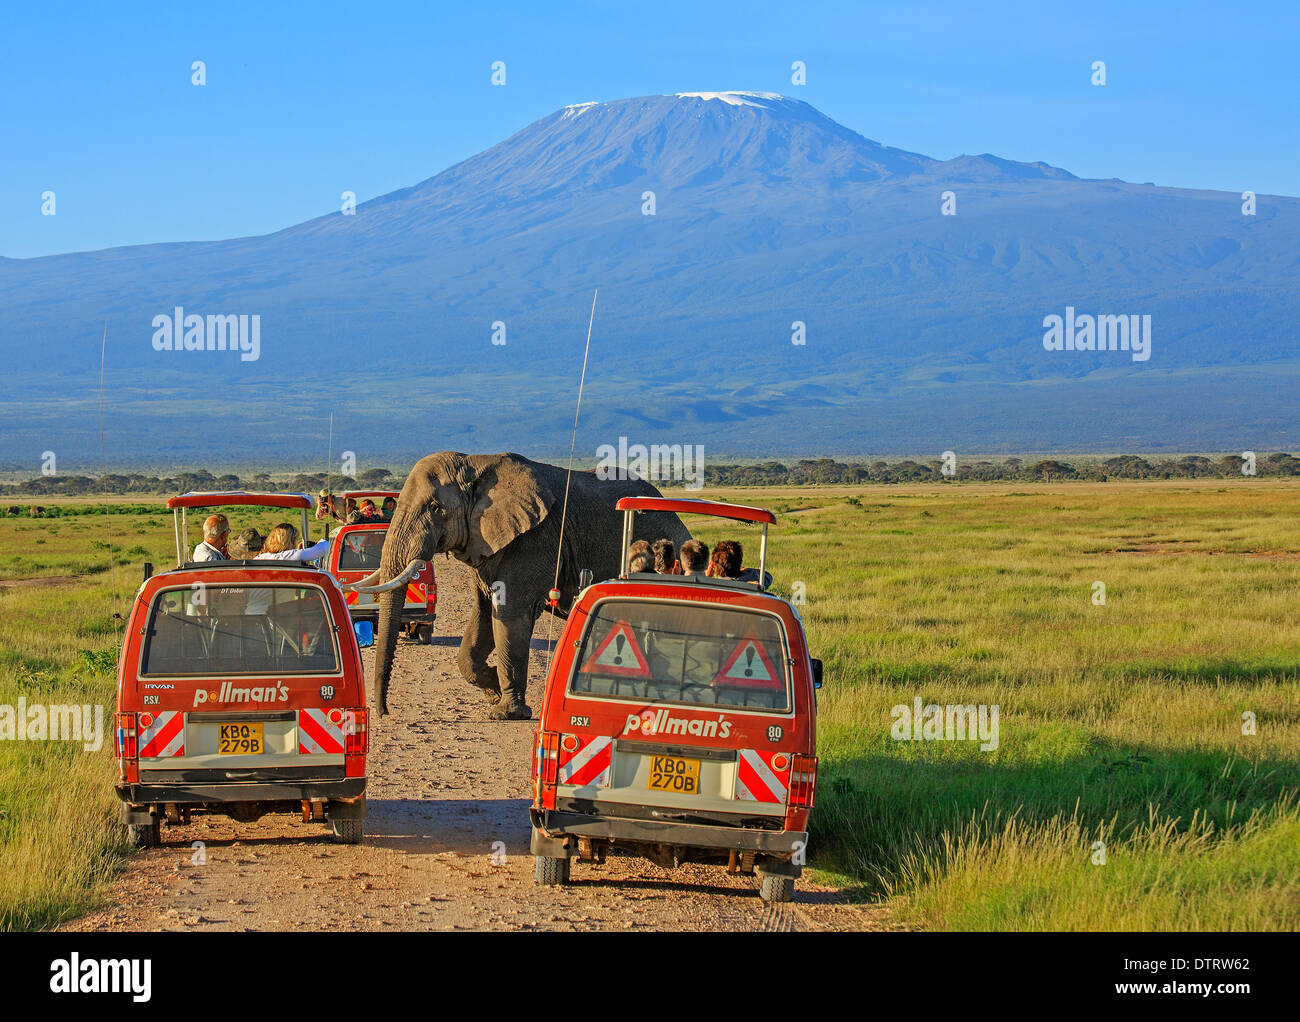 A Huge African Elephant walking past the safari vehicles with Mt. Kilimanjaro in the backdrop in Amboseli National Park, Kenya, Stock Photo